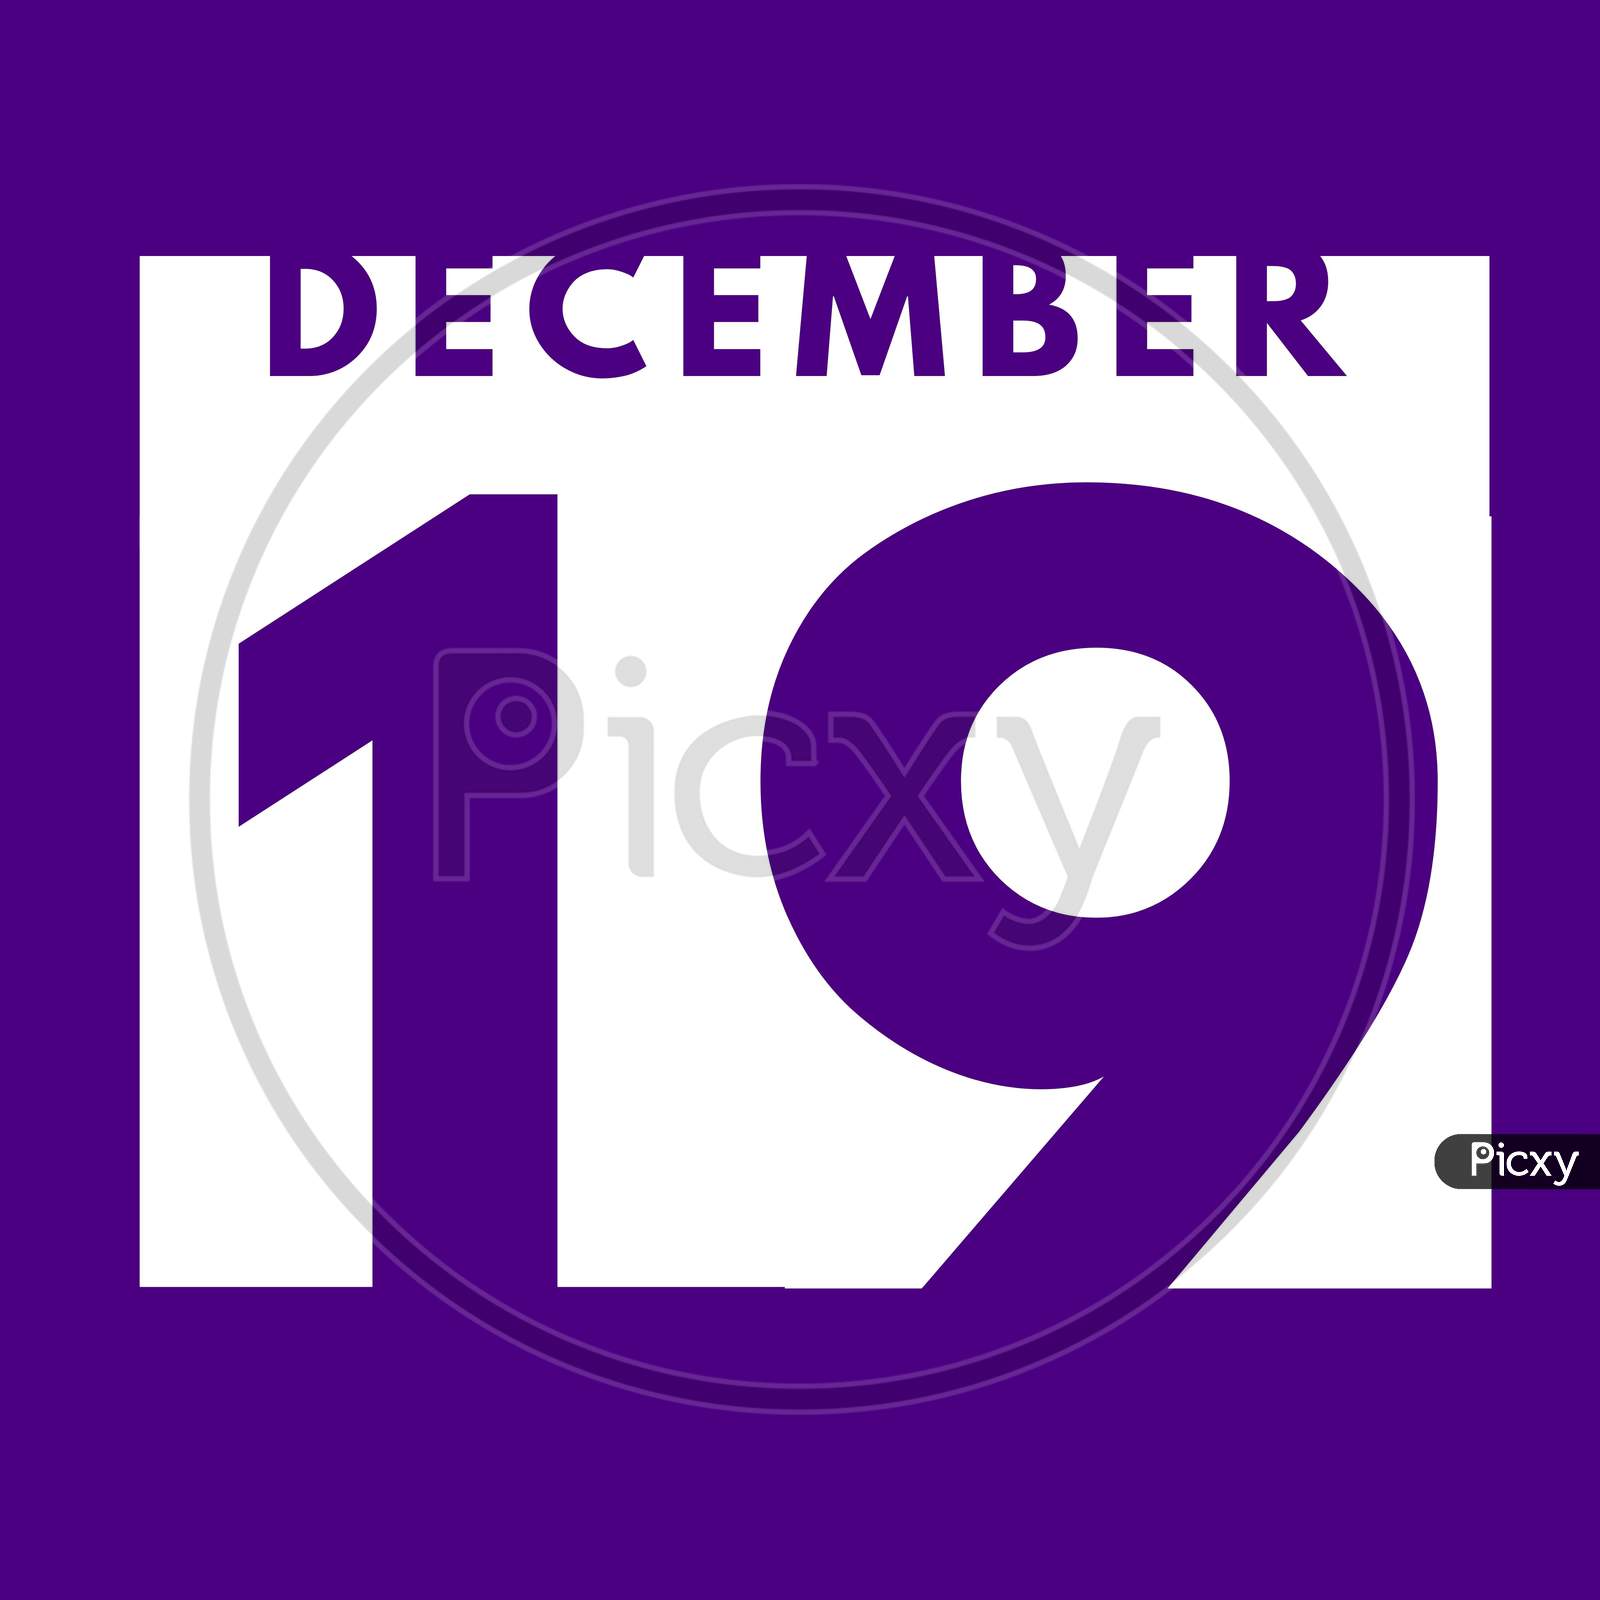 December 19 . Flat Modern Daily Calendar Icon .Date ,Day, Month .Calendar For The Month Of December